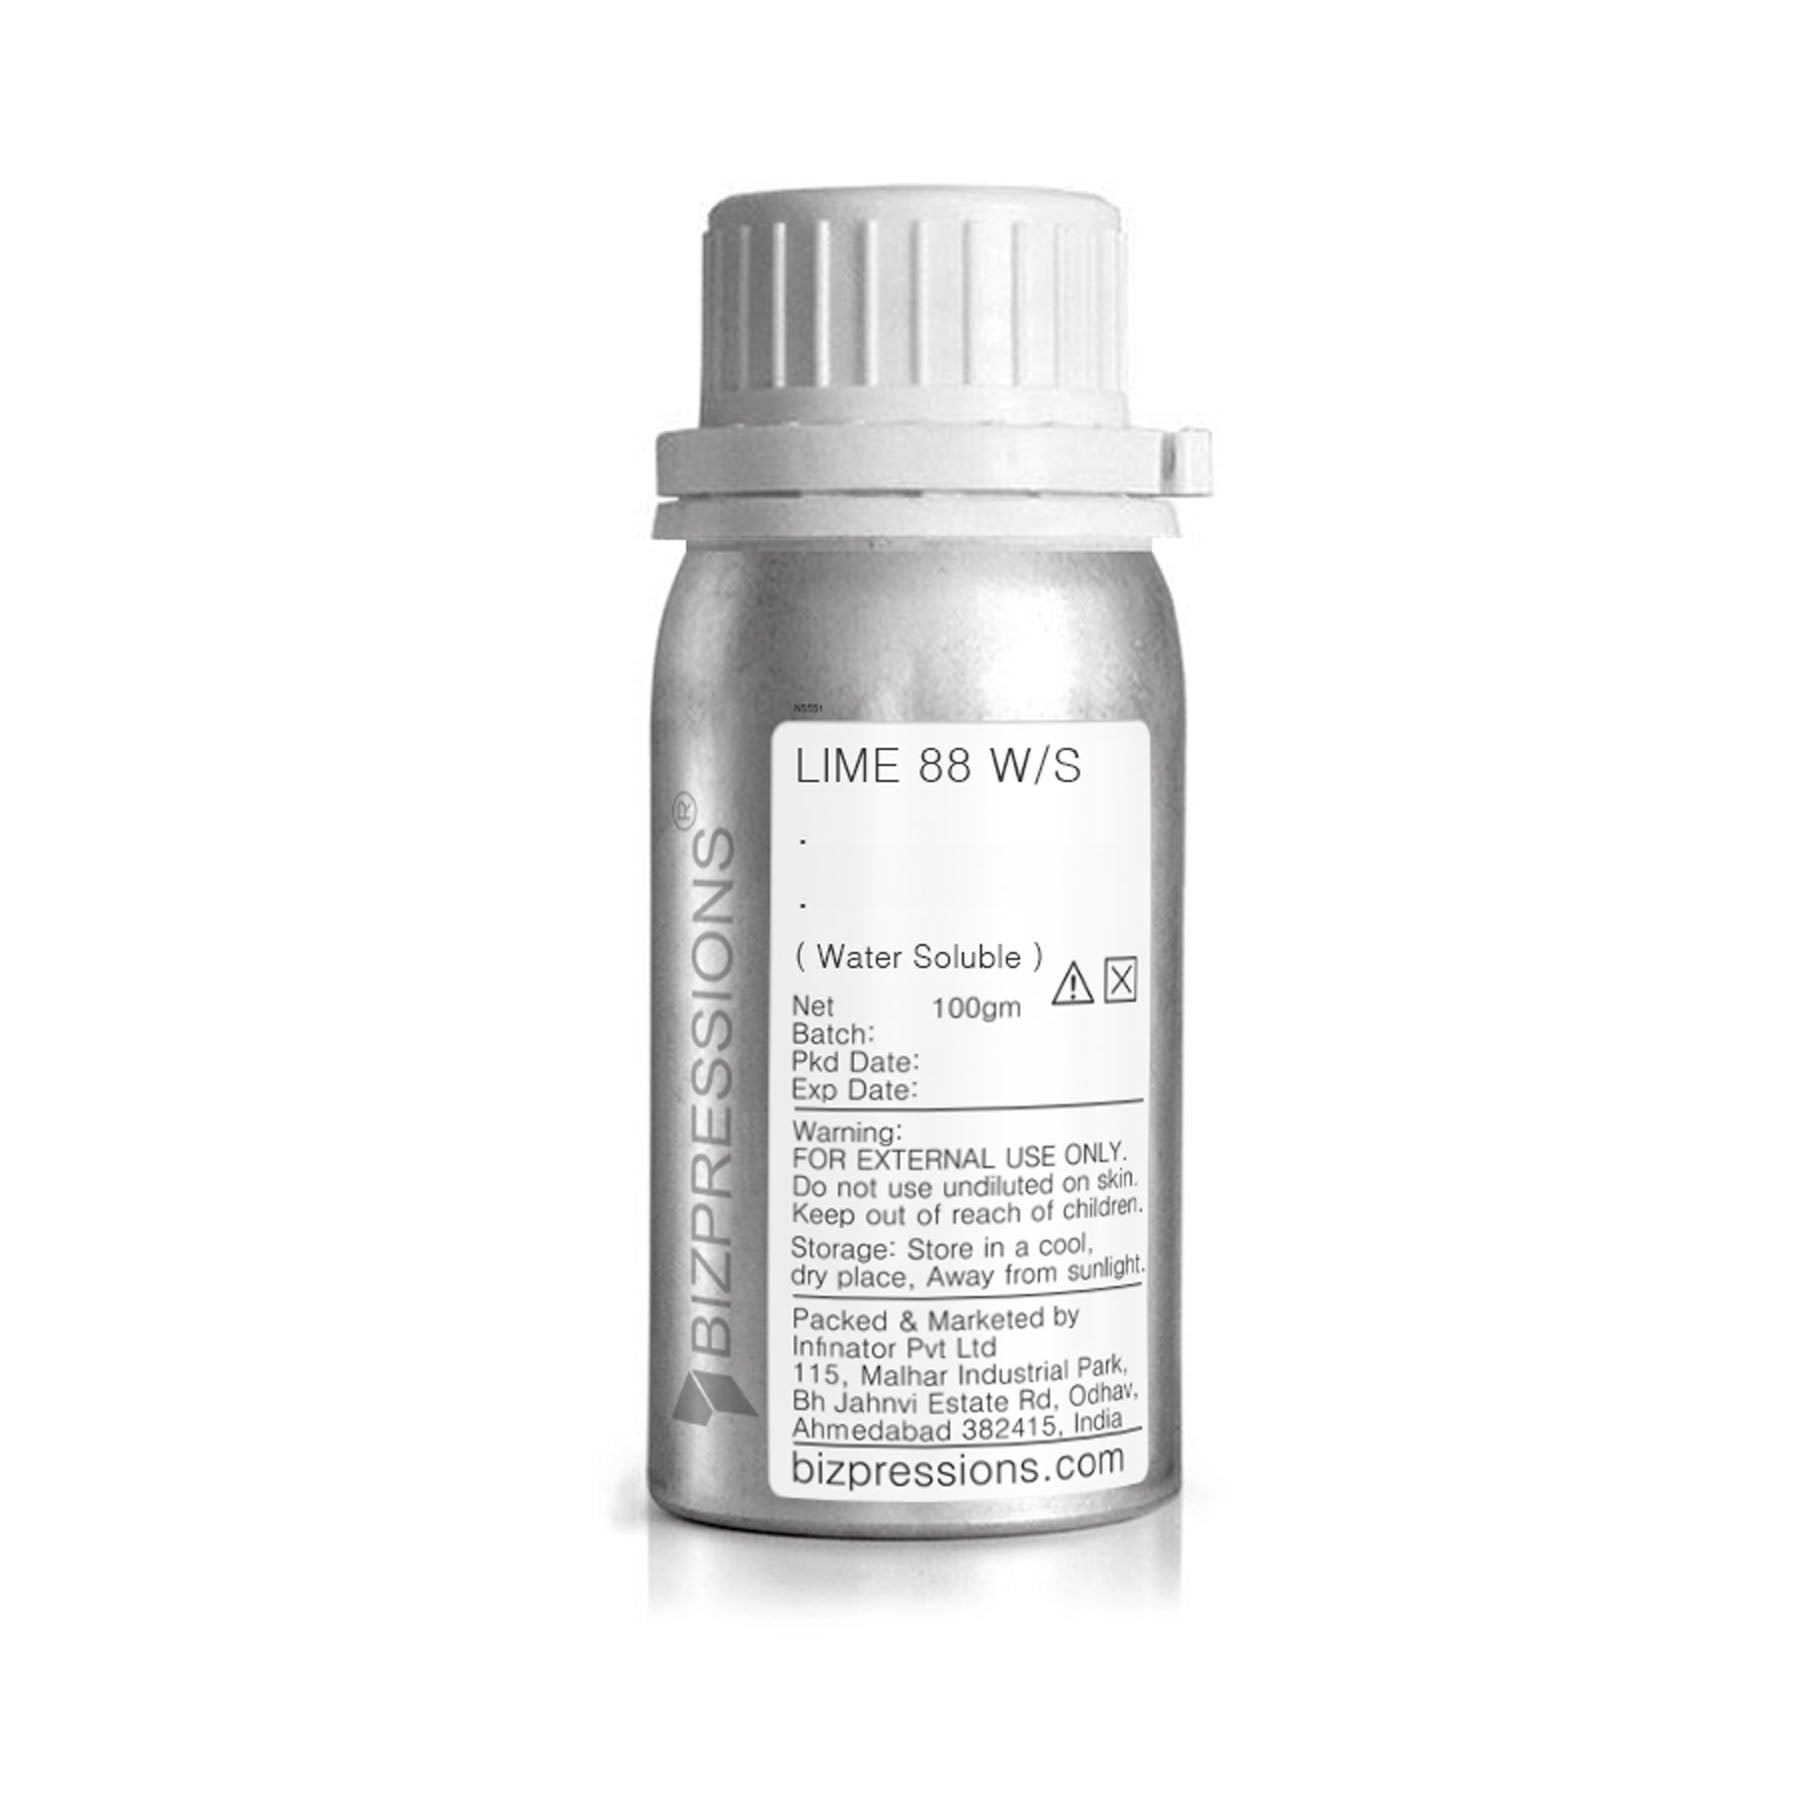 LIME 88 W/S - Fragrance ( Water Soluble ) - 100 gm